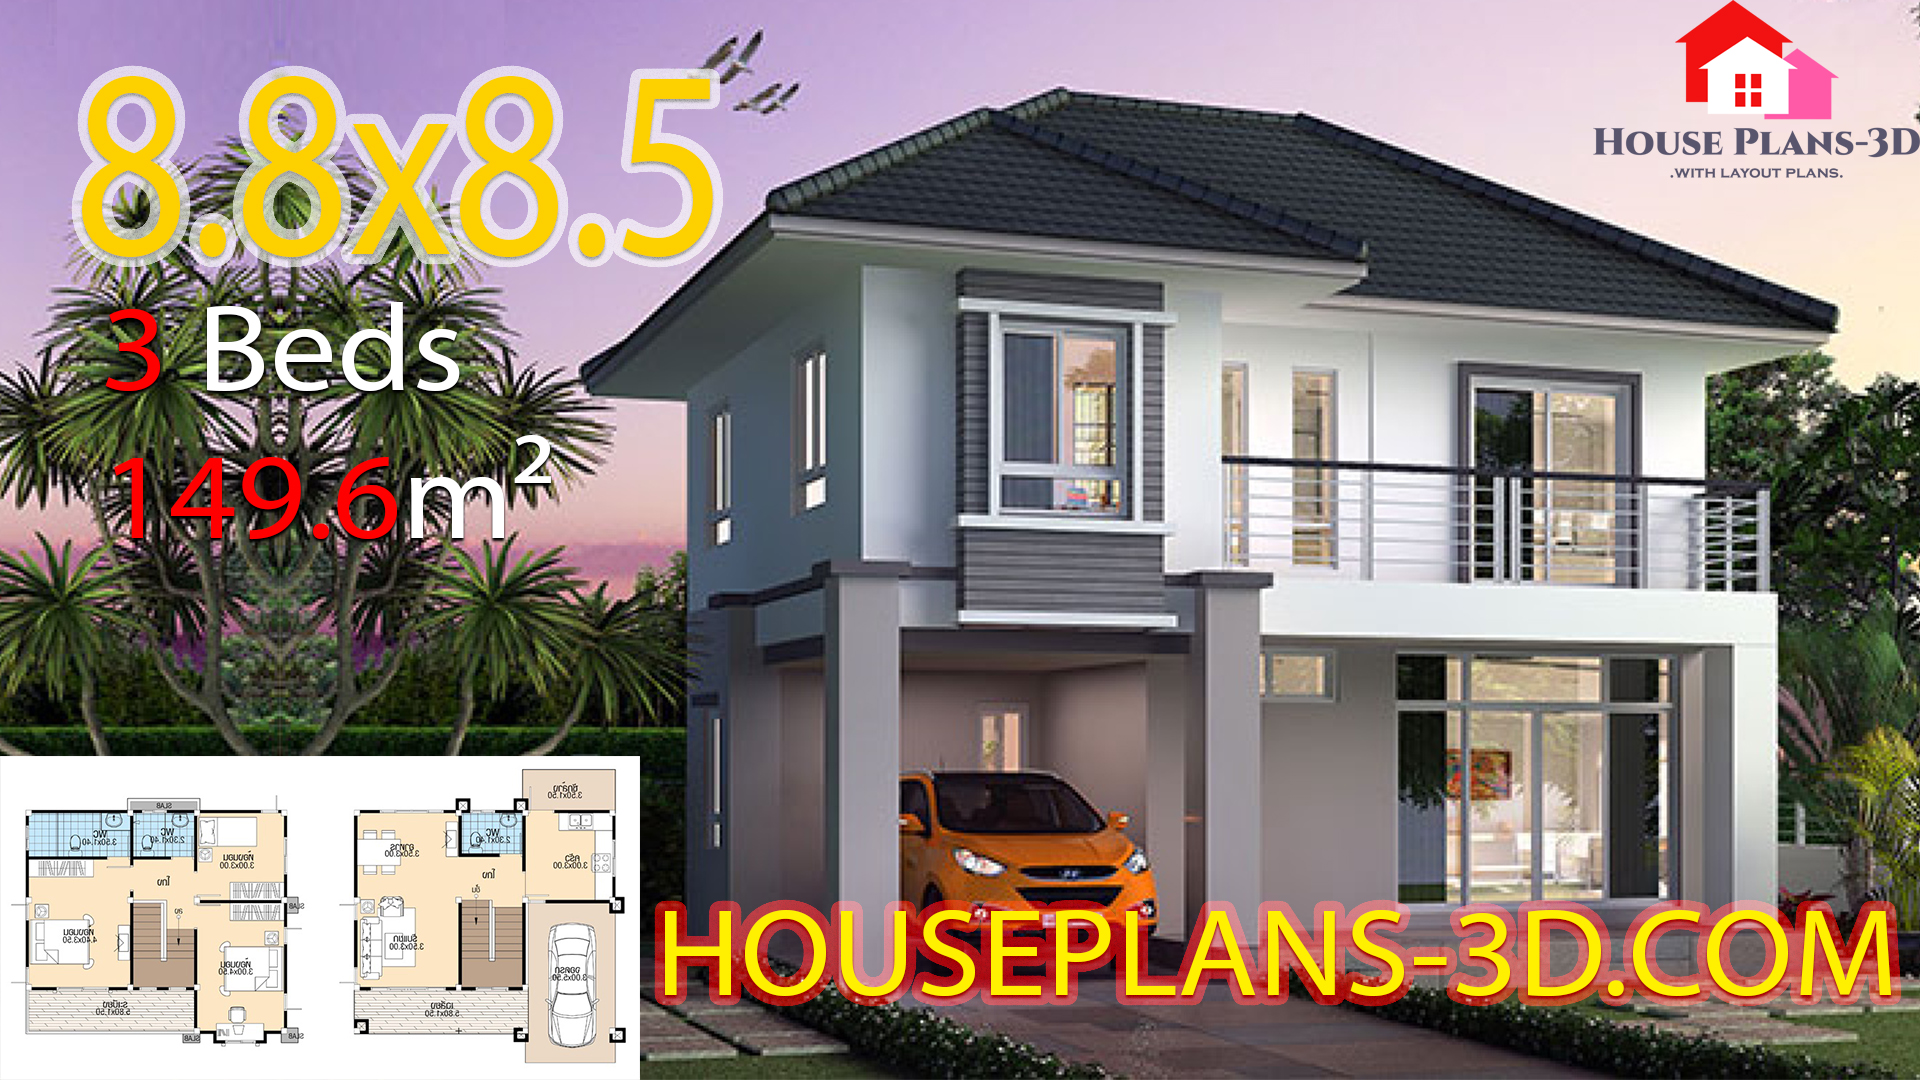 House design 8.8x8.5 with 3 Bedrooms - House Plans 3D